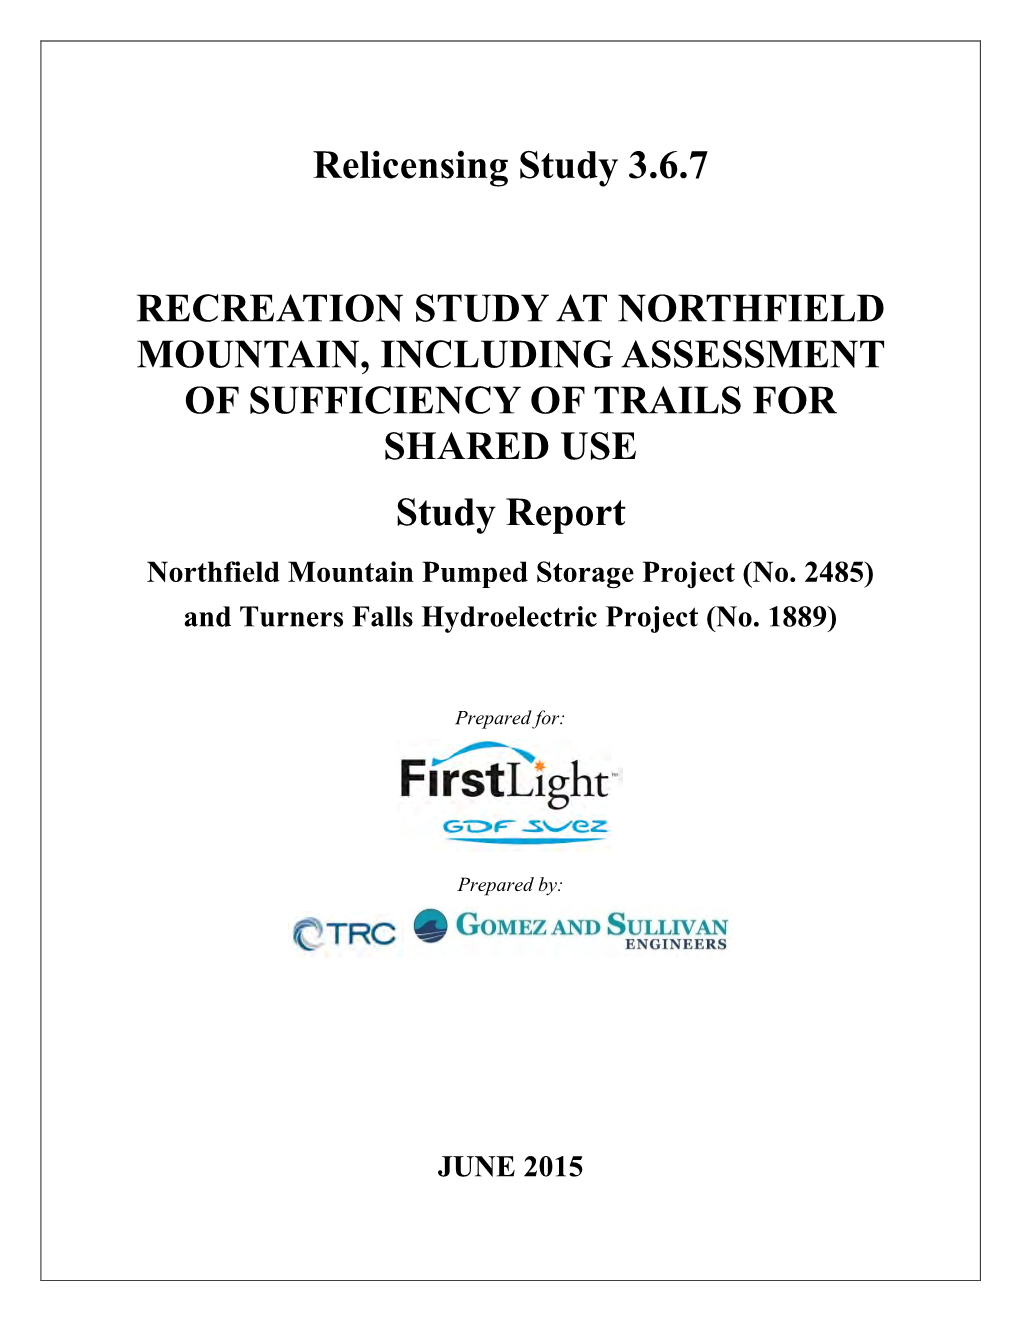 Relicensing Study 3.6.7 Recreation Study at Northfield Mountain, Including Assessment of Sufficiency of Trails for Shared Use